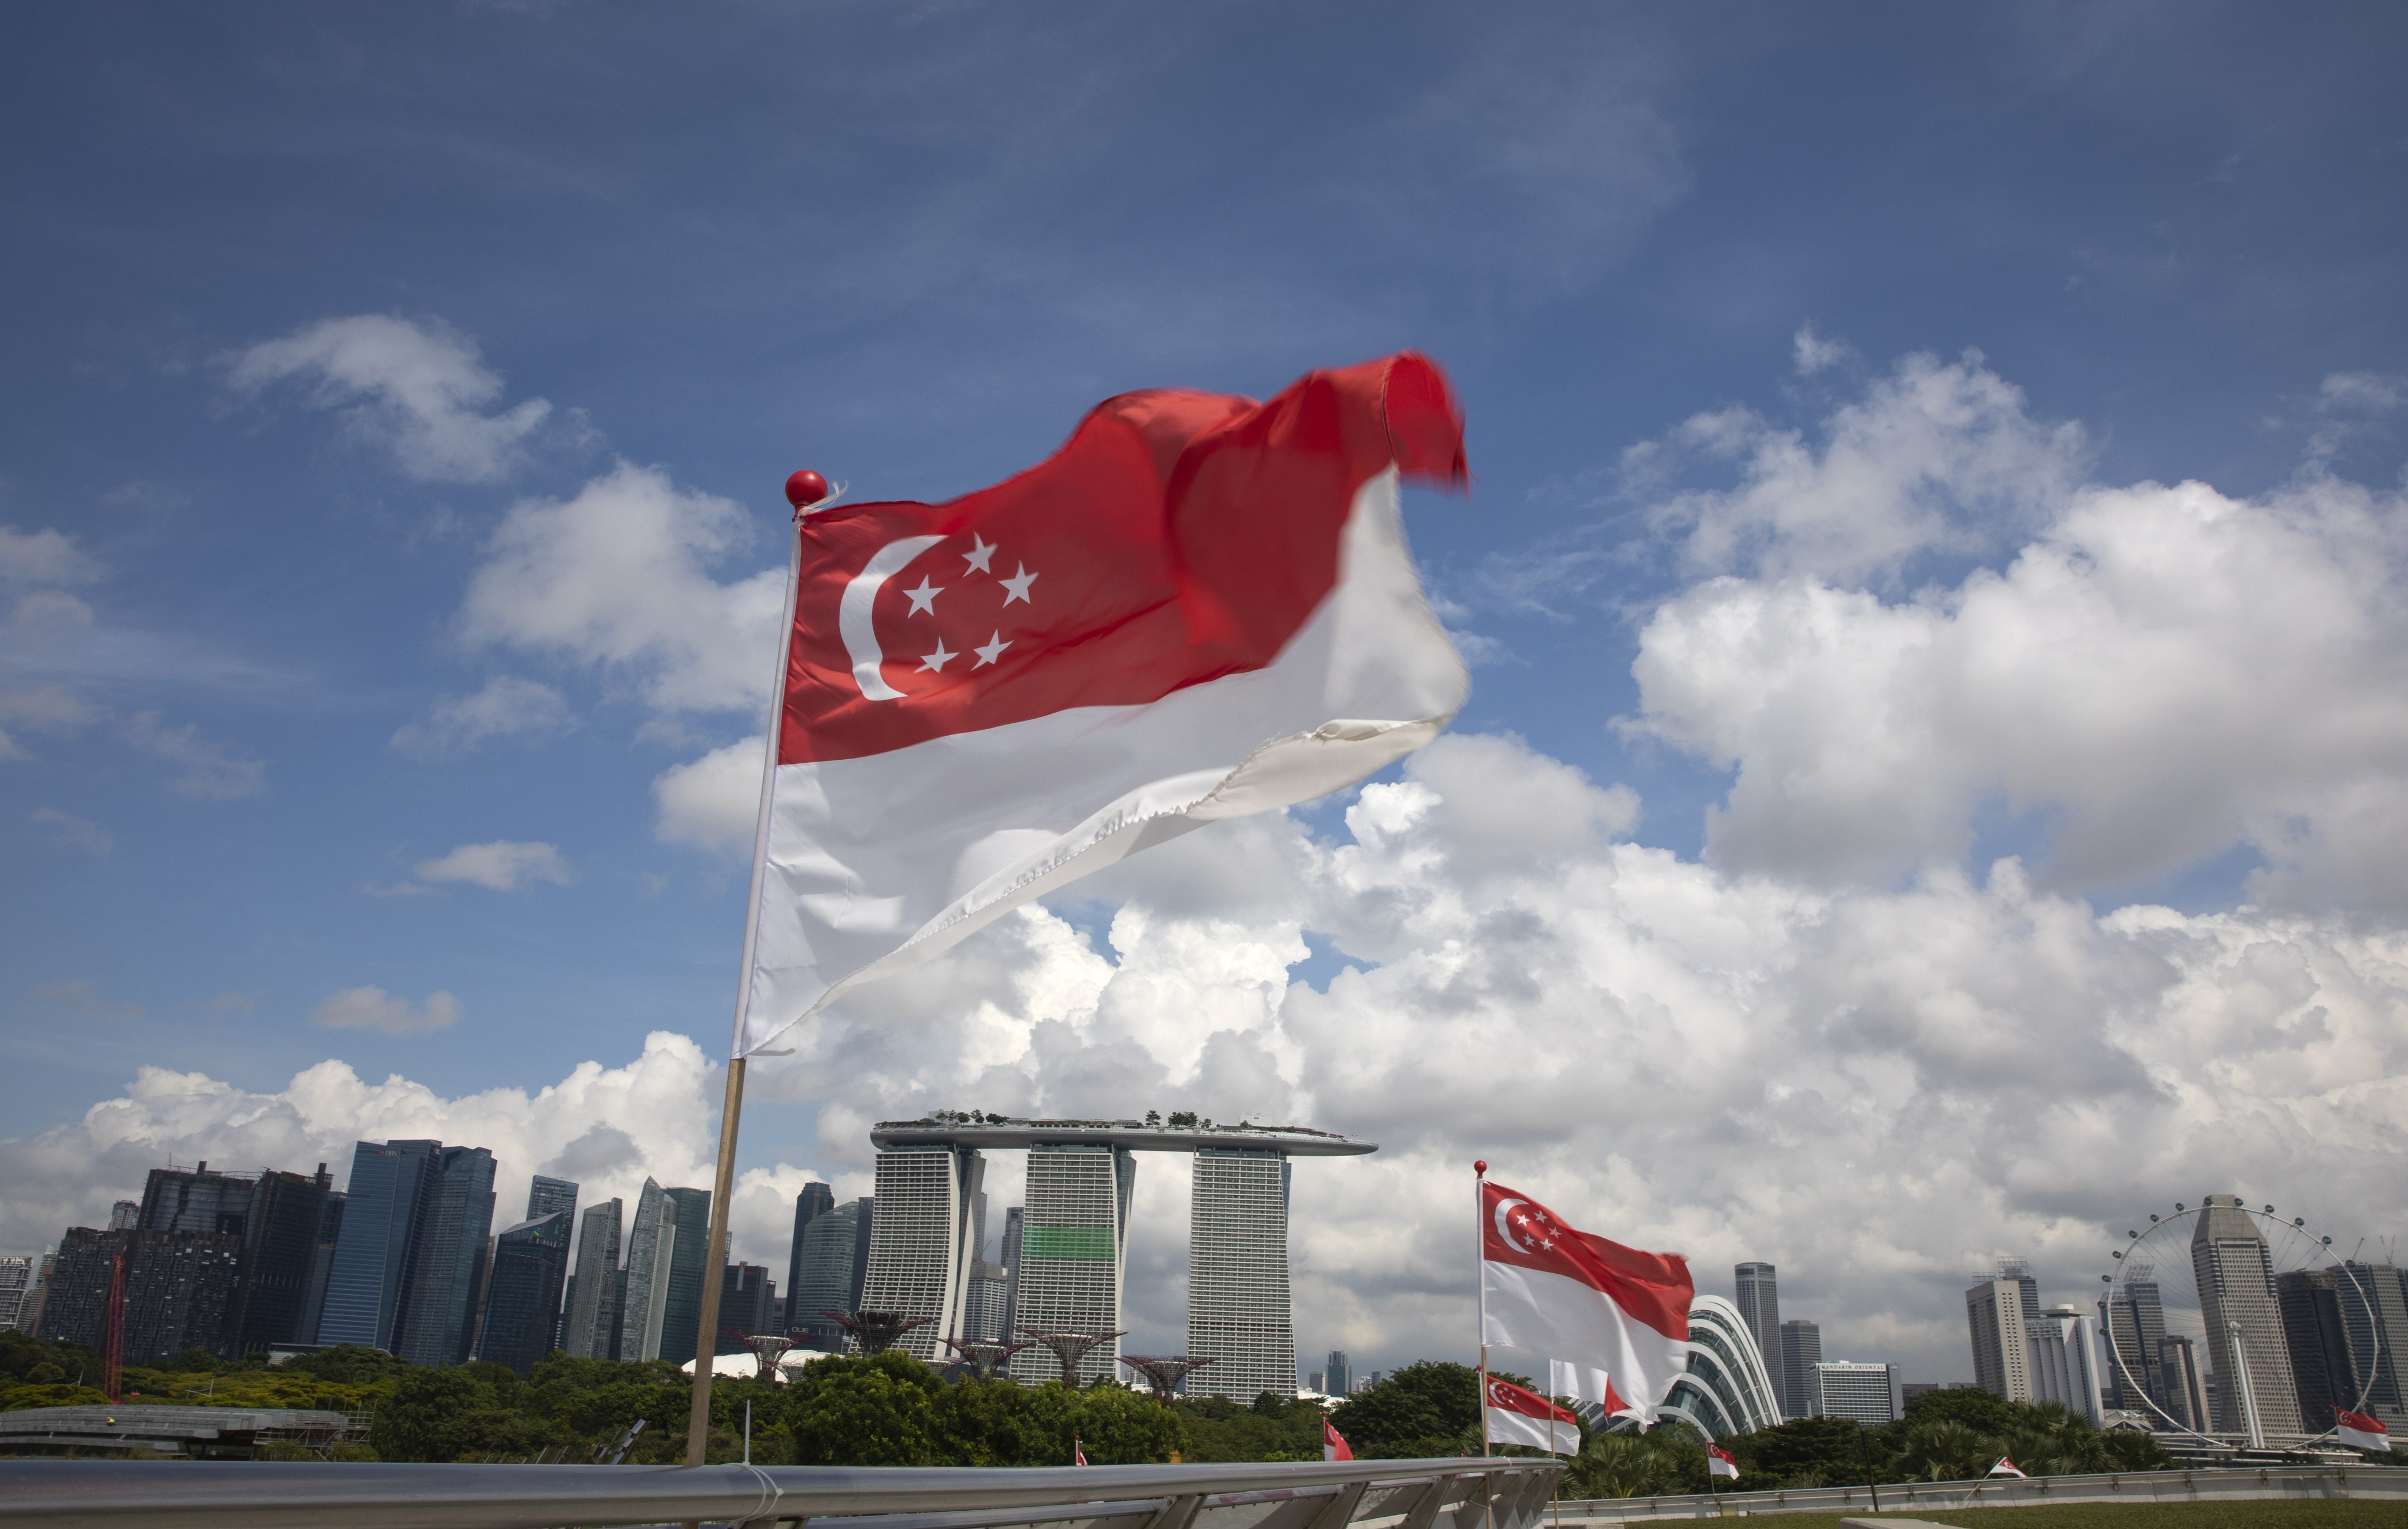 Singapore national flags flutter over a view of the city skyline. This was the first prosecution for an offence under a clause in the Penal Code that criminalises the exploitative sexual penetration of a minor between 16 and 18 years old. Photo: EPA-EFE